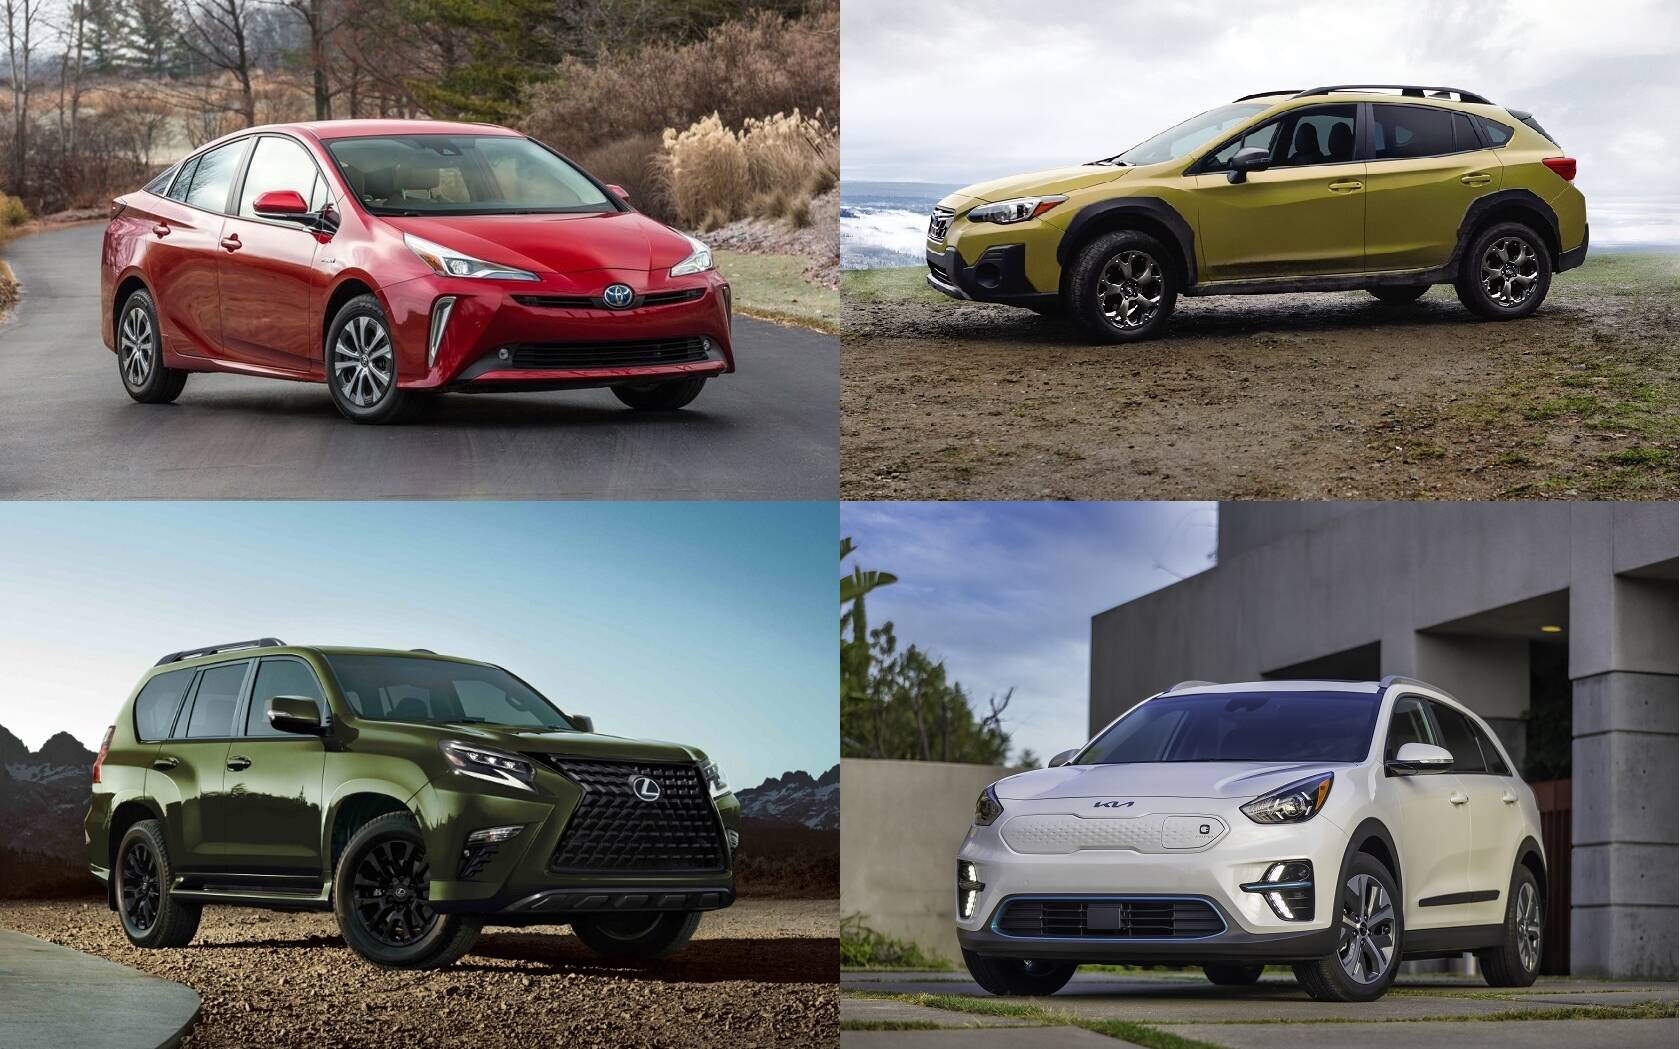 Top 10 Most Reliable 2022 Models According to Consumer Reports - 1/11